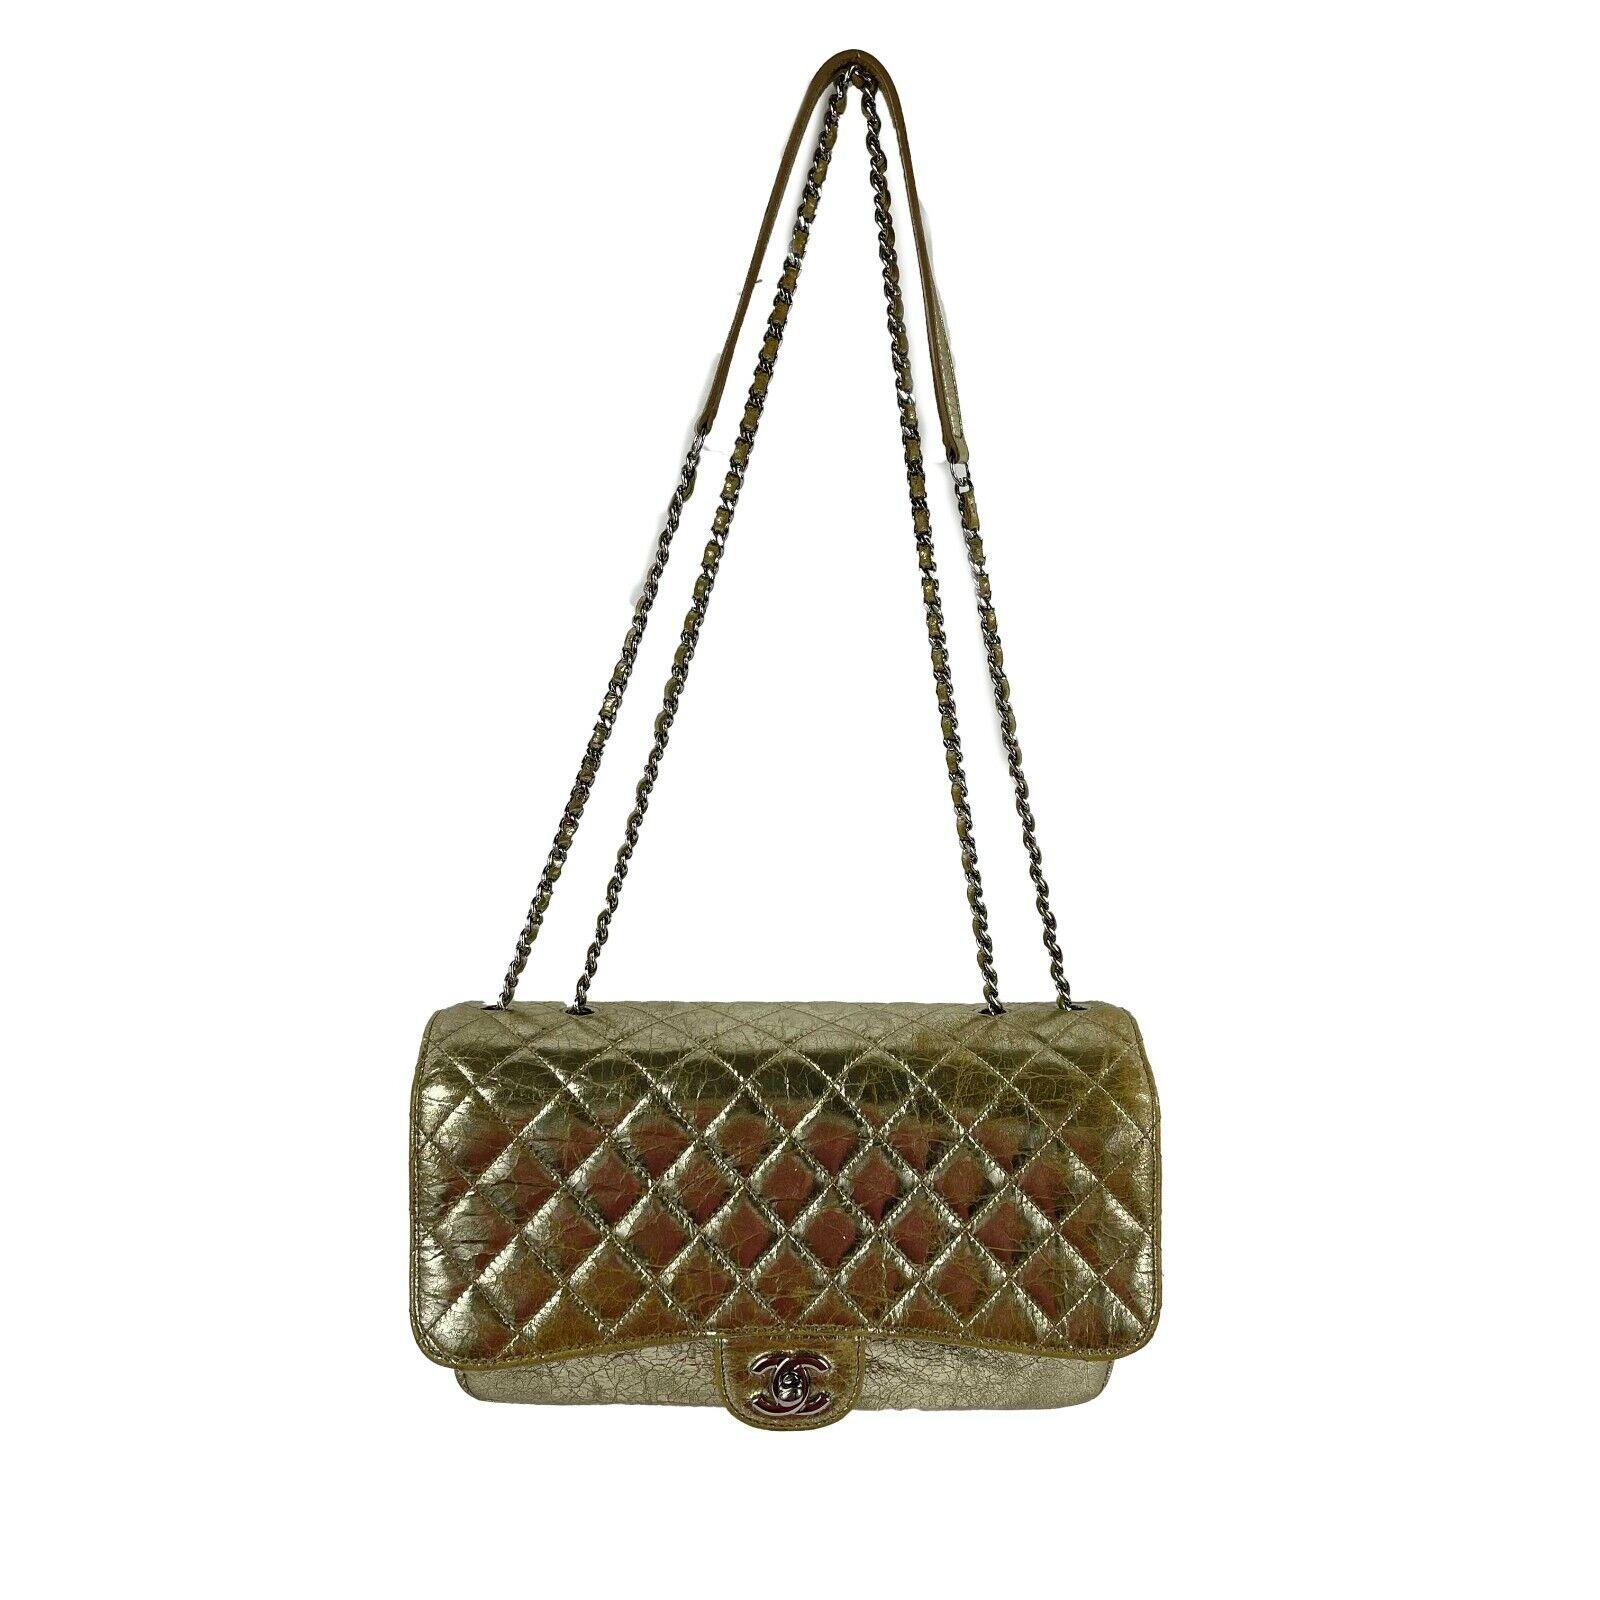 CHANEL Quilted Distressed Glazed Gold Leather Accordion Flap Shoulder Bag Medium 6